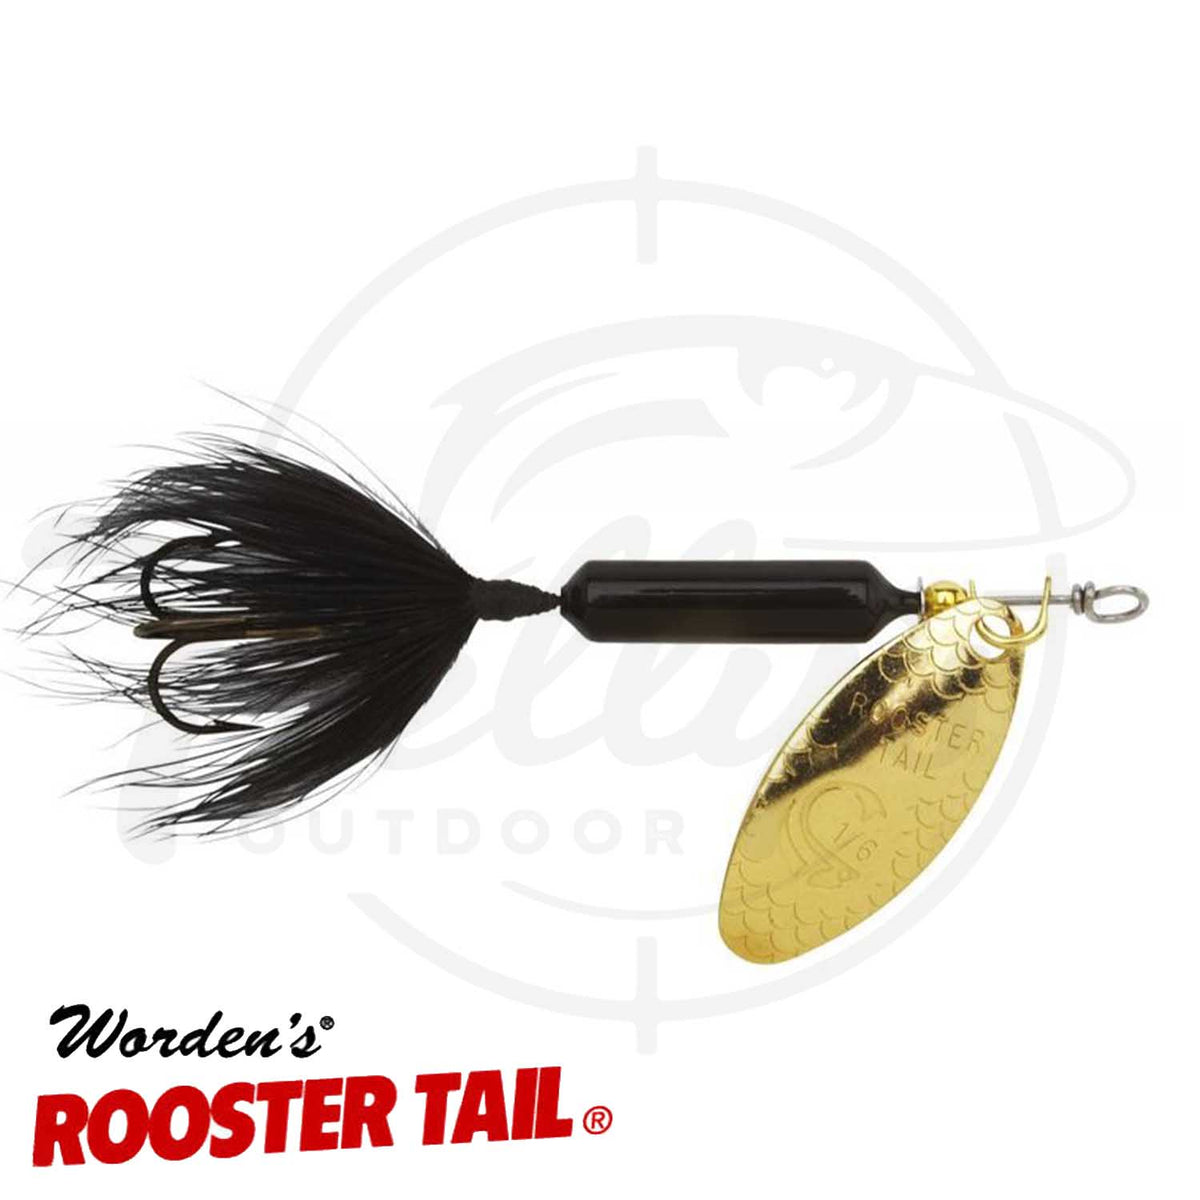 Yakima Bait Wordens Rooster Tail Spinner Trout Lure – Trellys